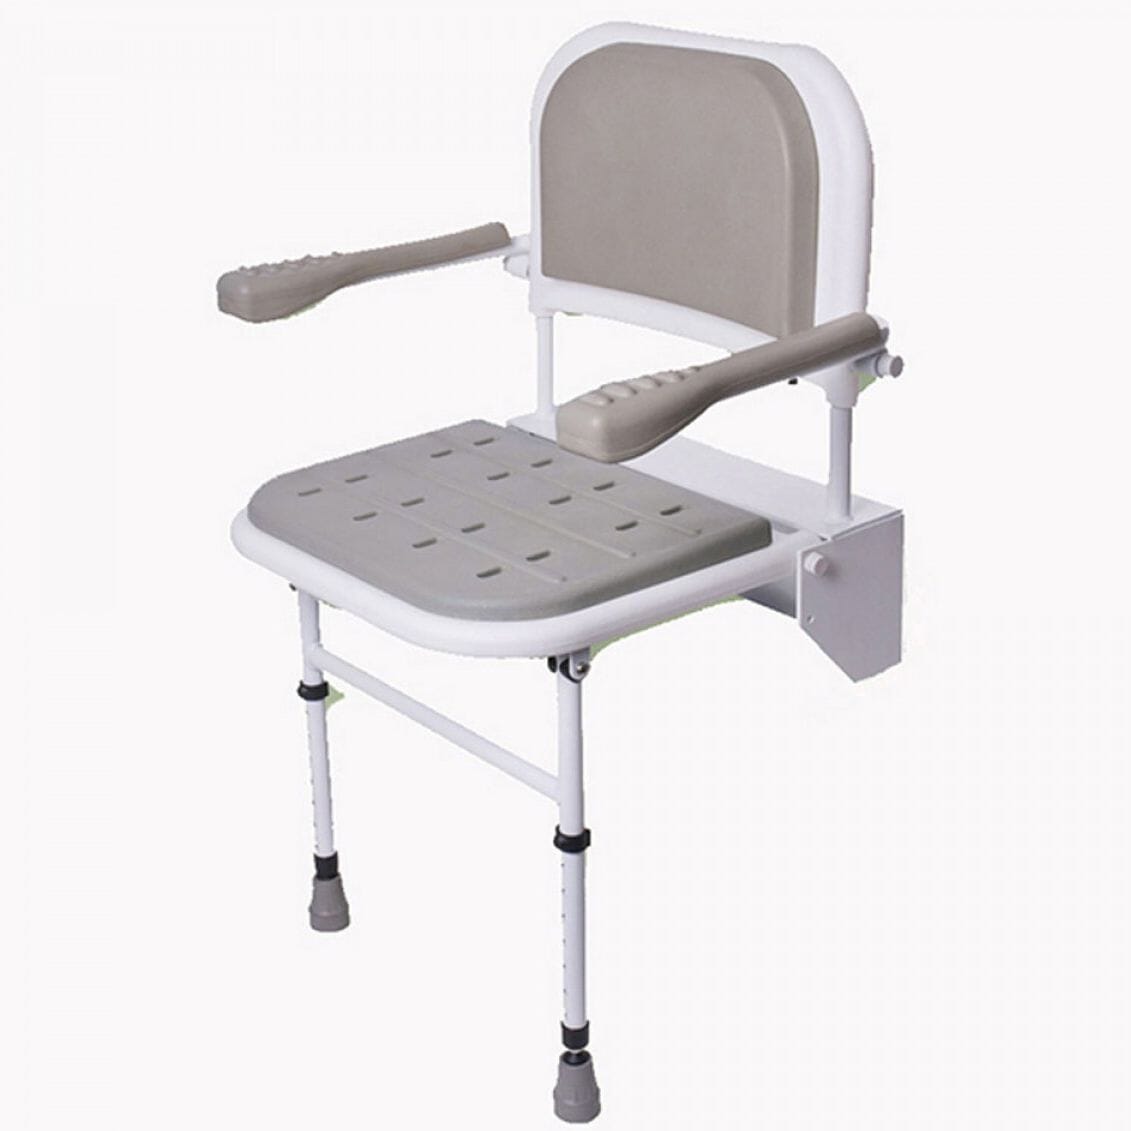 View Folding Shower Seat with Legs Padded Back Arms Seat information